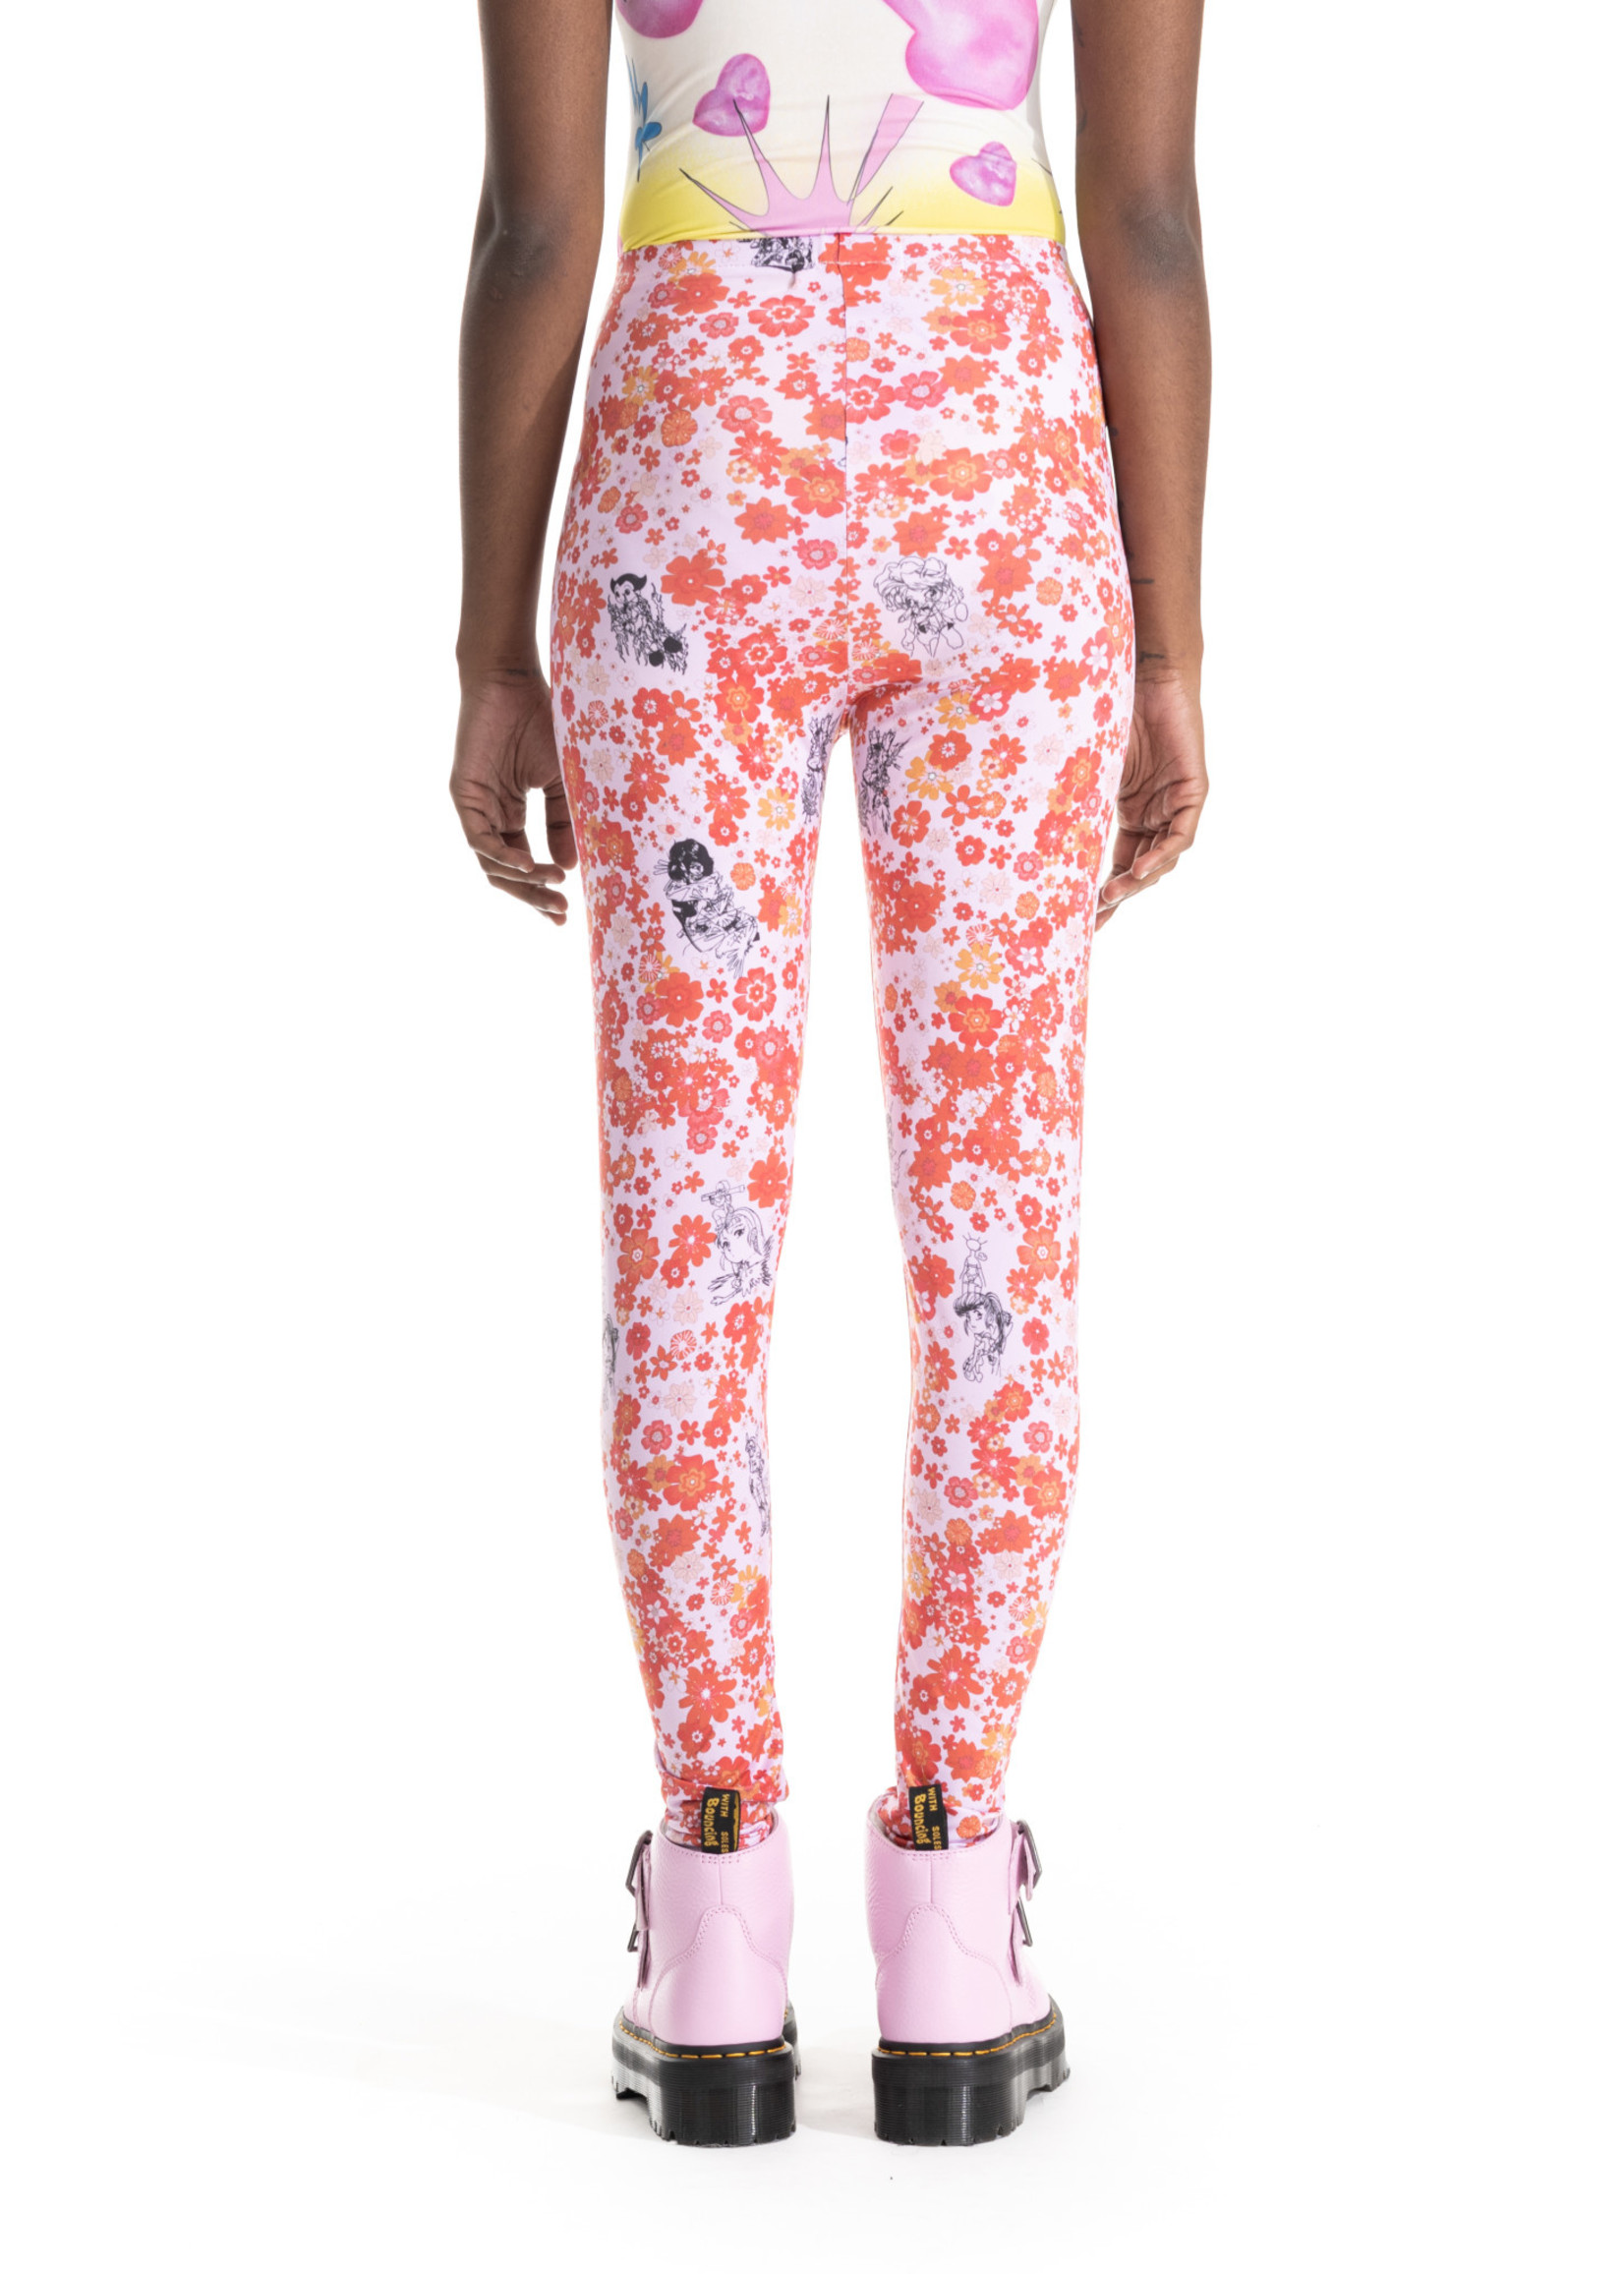 LIBERAL YOUTH MINISTRY Red Floral Anime Print Leggings